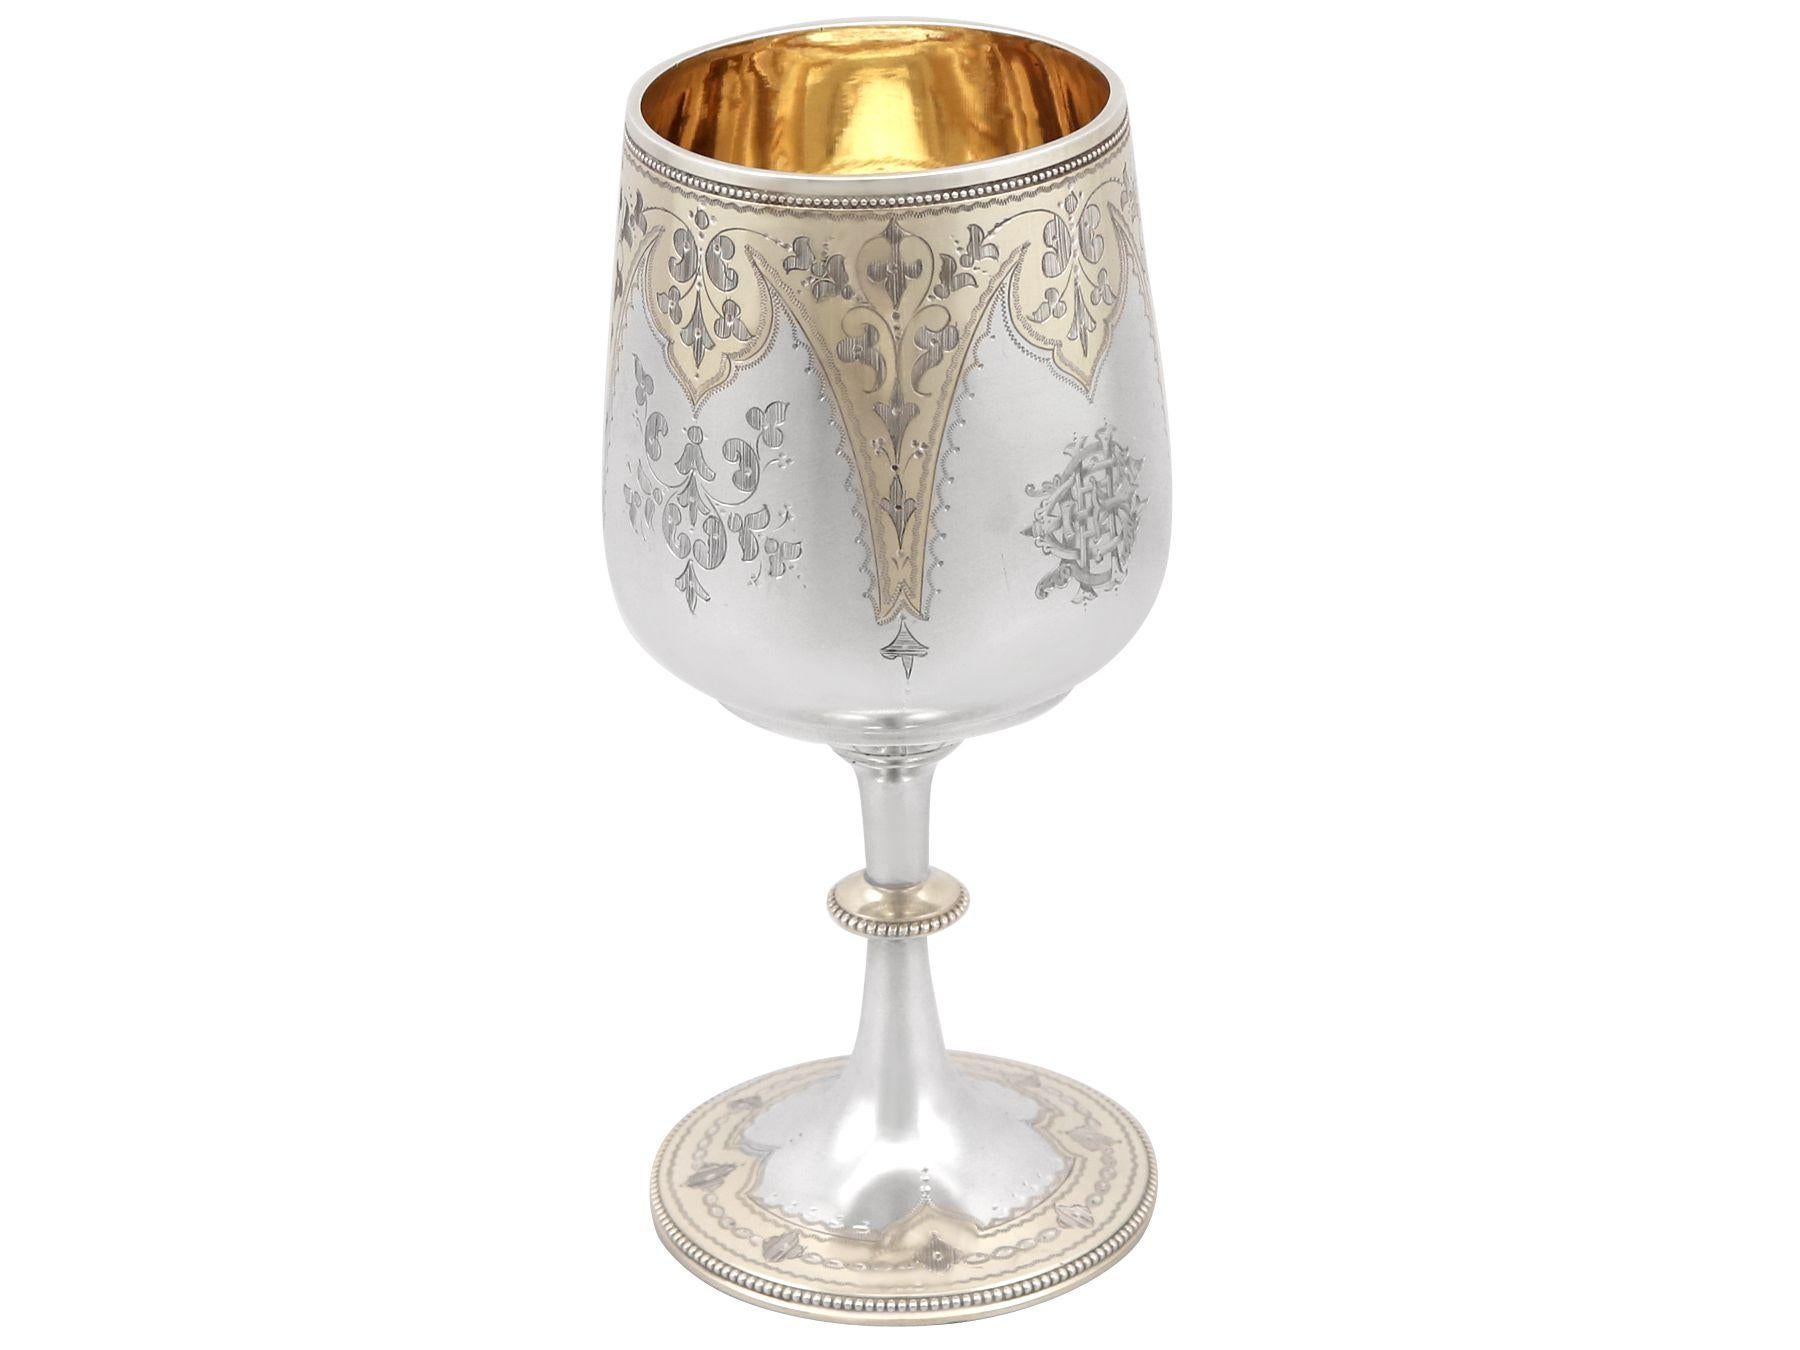 An exceptional, fine and impressive antique Victorian sterling silver goblet; an addition to our wine and drinks related silverware collection

This exceptional, fine and impressive Victorian antique goblet has a circular bell shaped form onto a